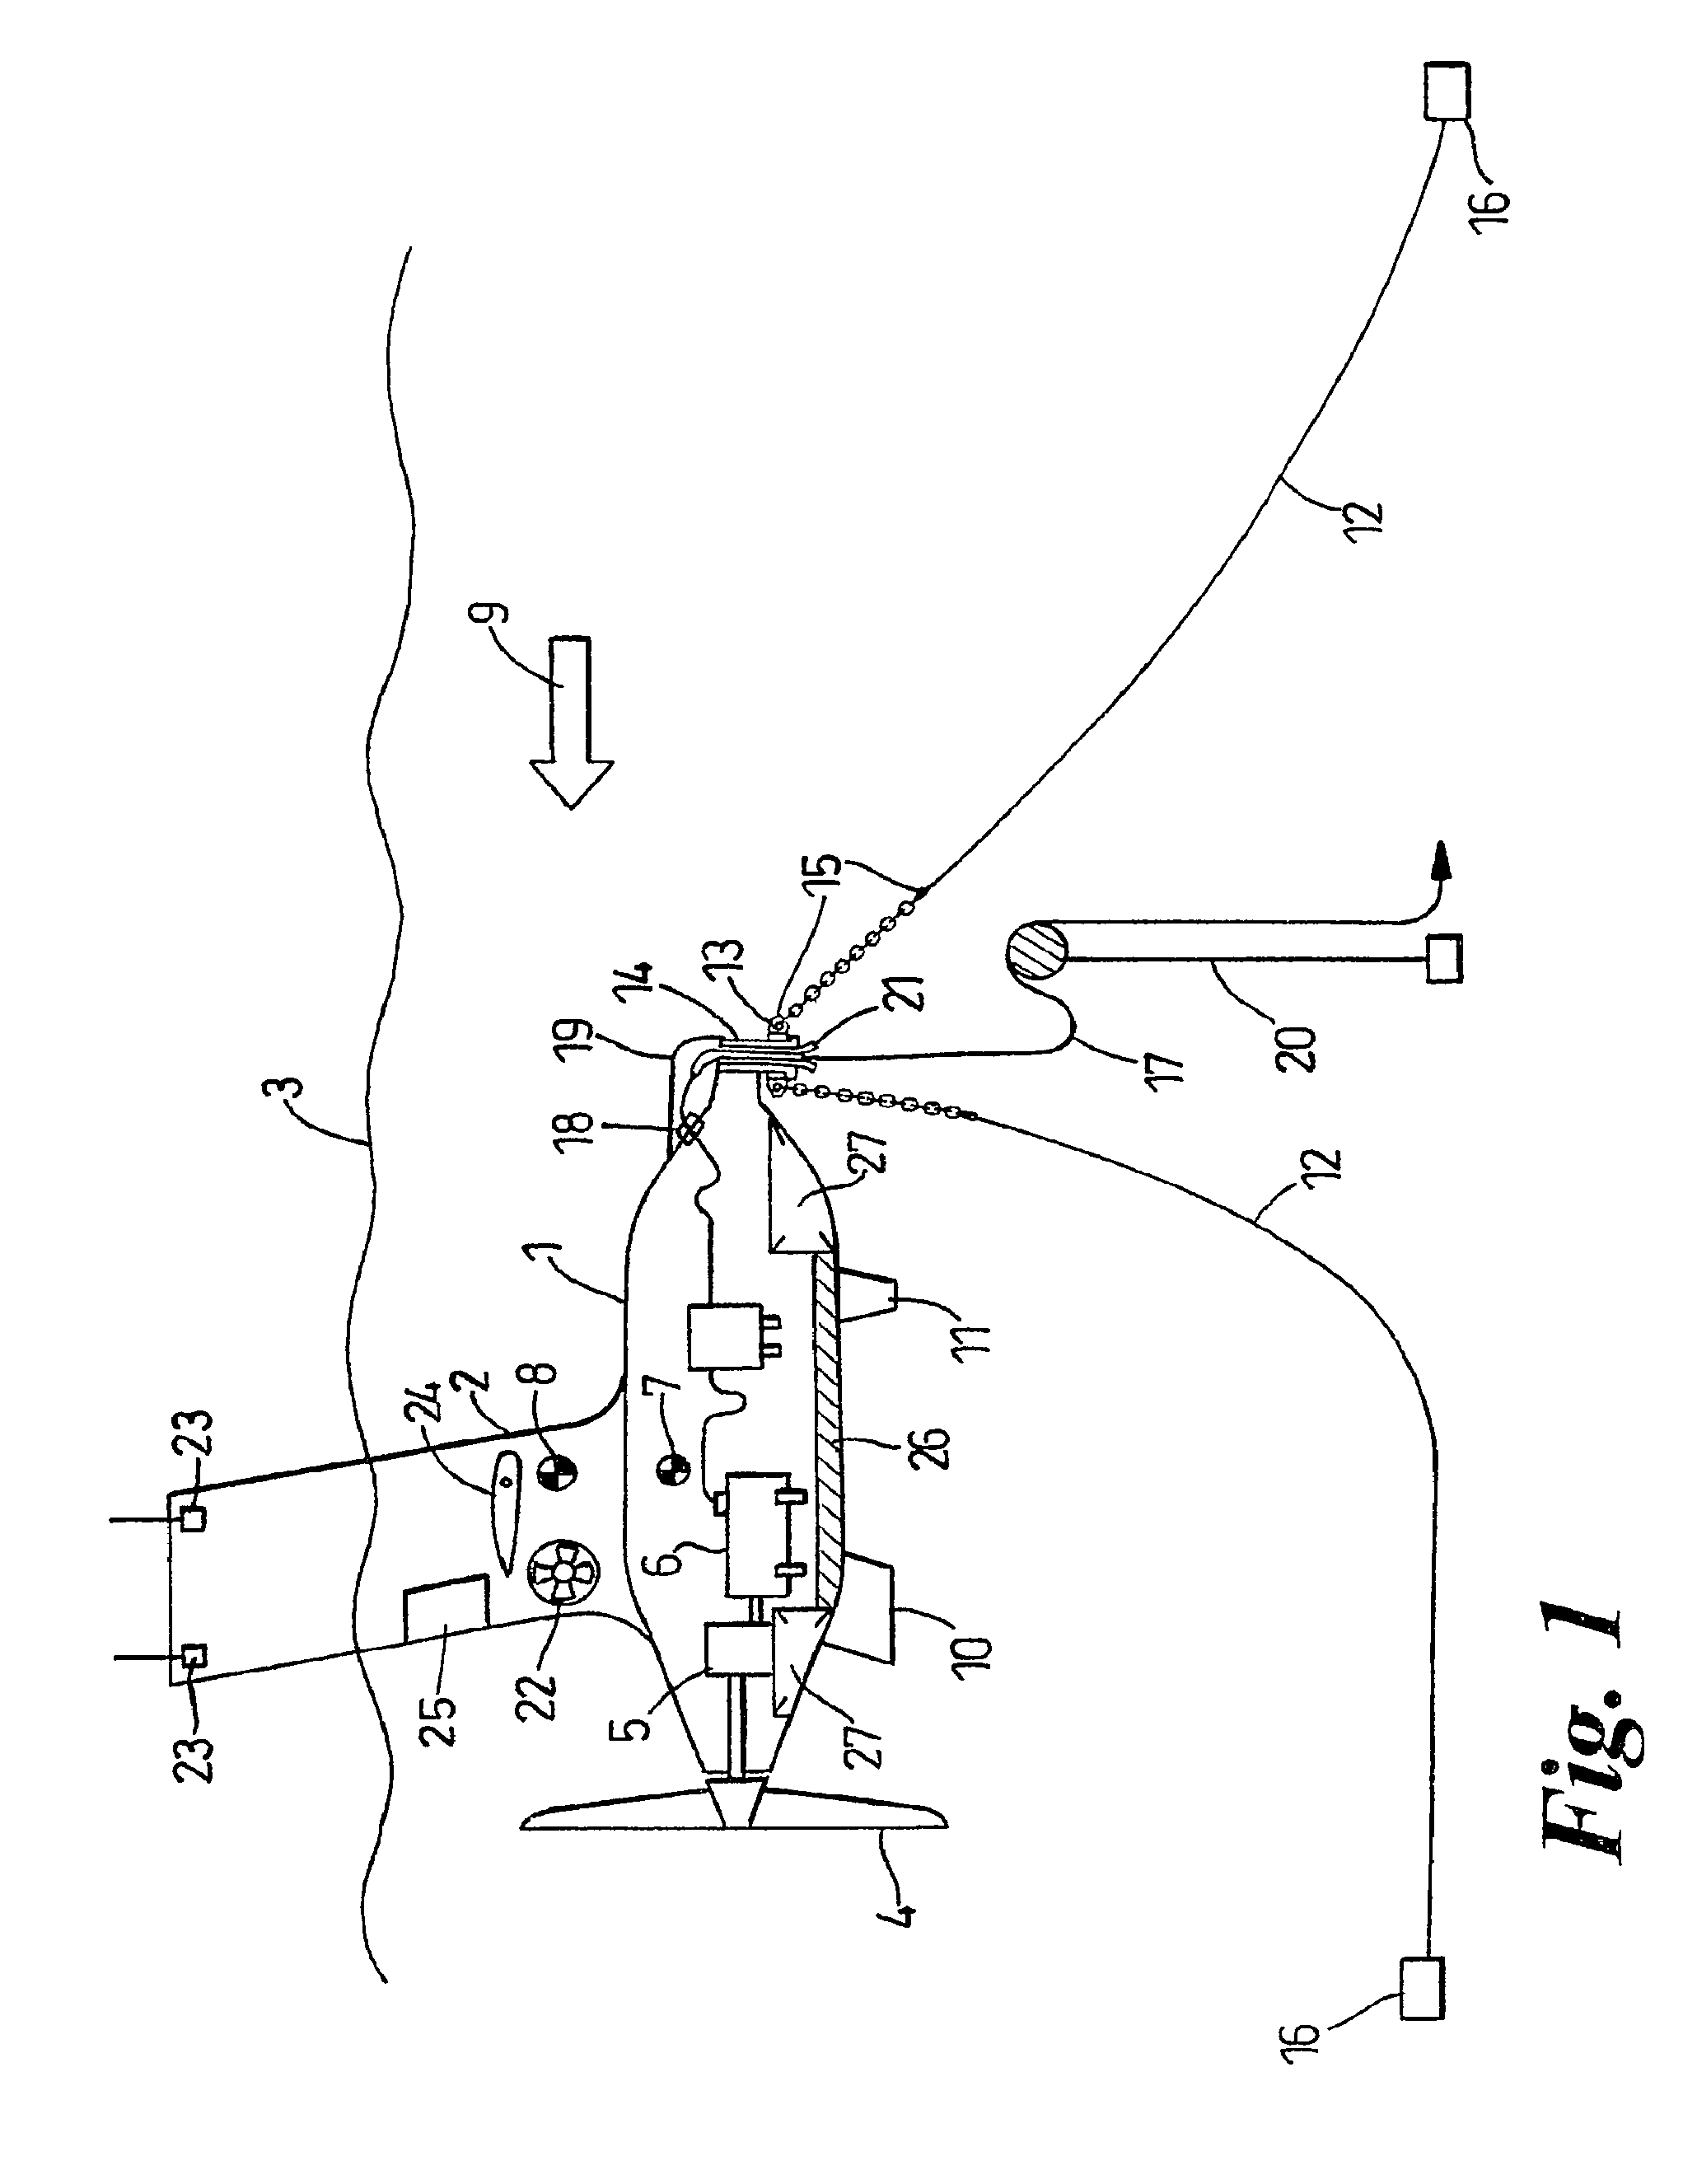 Floating apparatus for deploying in marine current for gaining energy